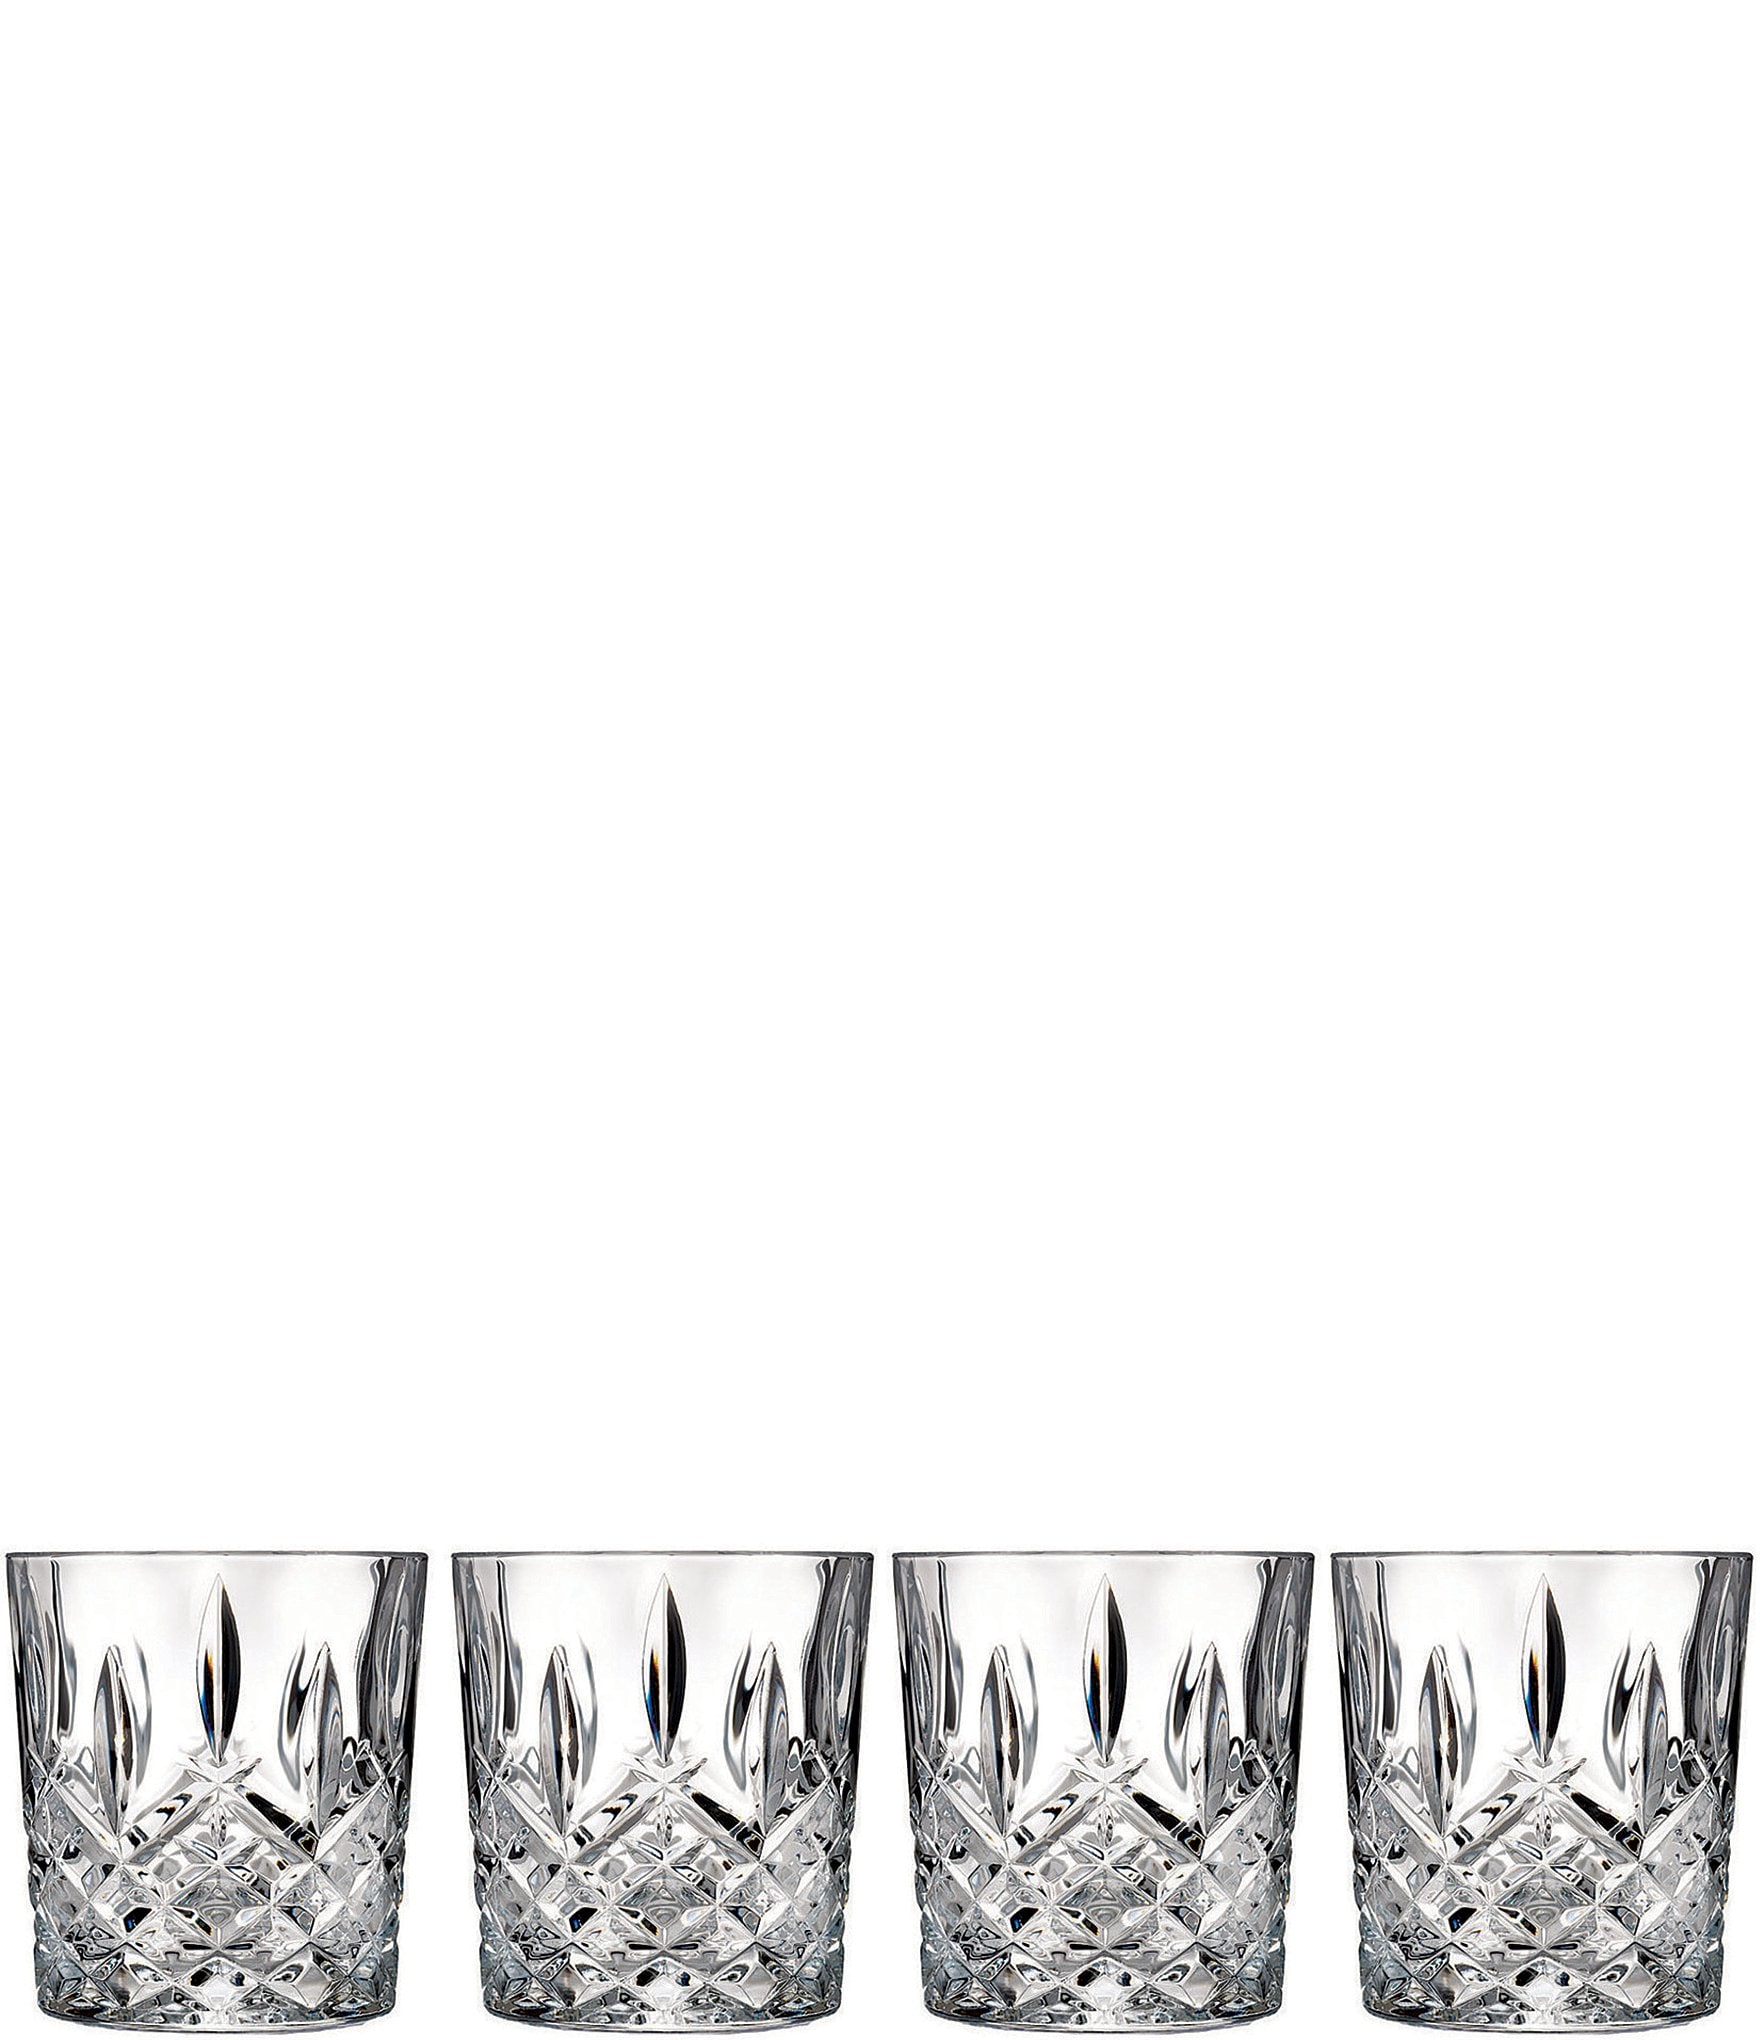 https://dimg.dillards.com/is/image/DillardsZoom/zoom/marquis-by-waterford-markham-traditional-crystal-double-old-fashioned-glasses-set-of-4/00000000_zi_90af5cca-b559-4ae2-8959-88f1bf02a076.jpg